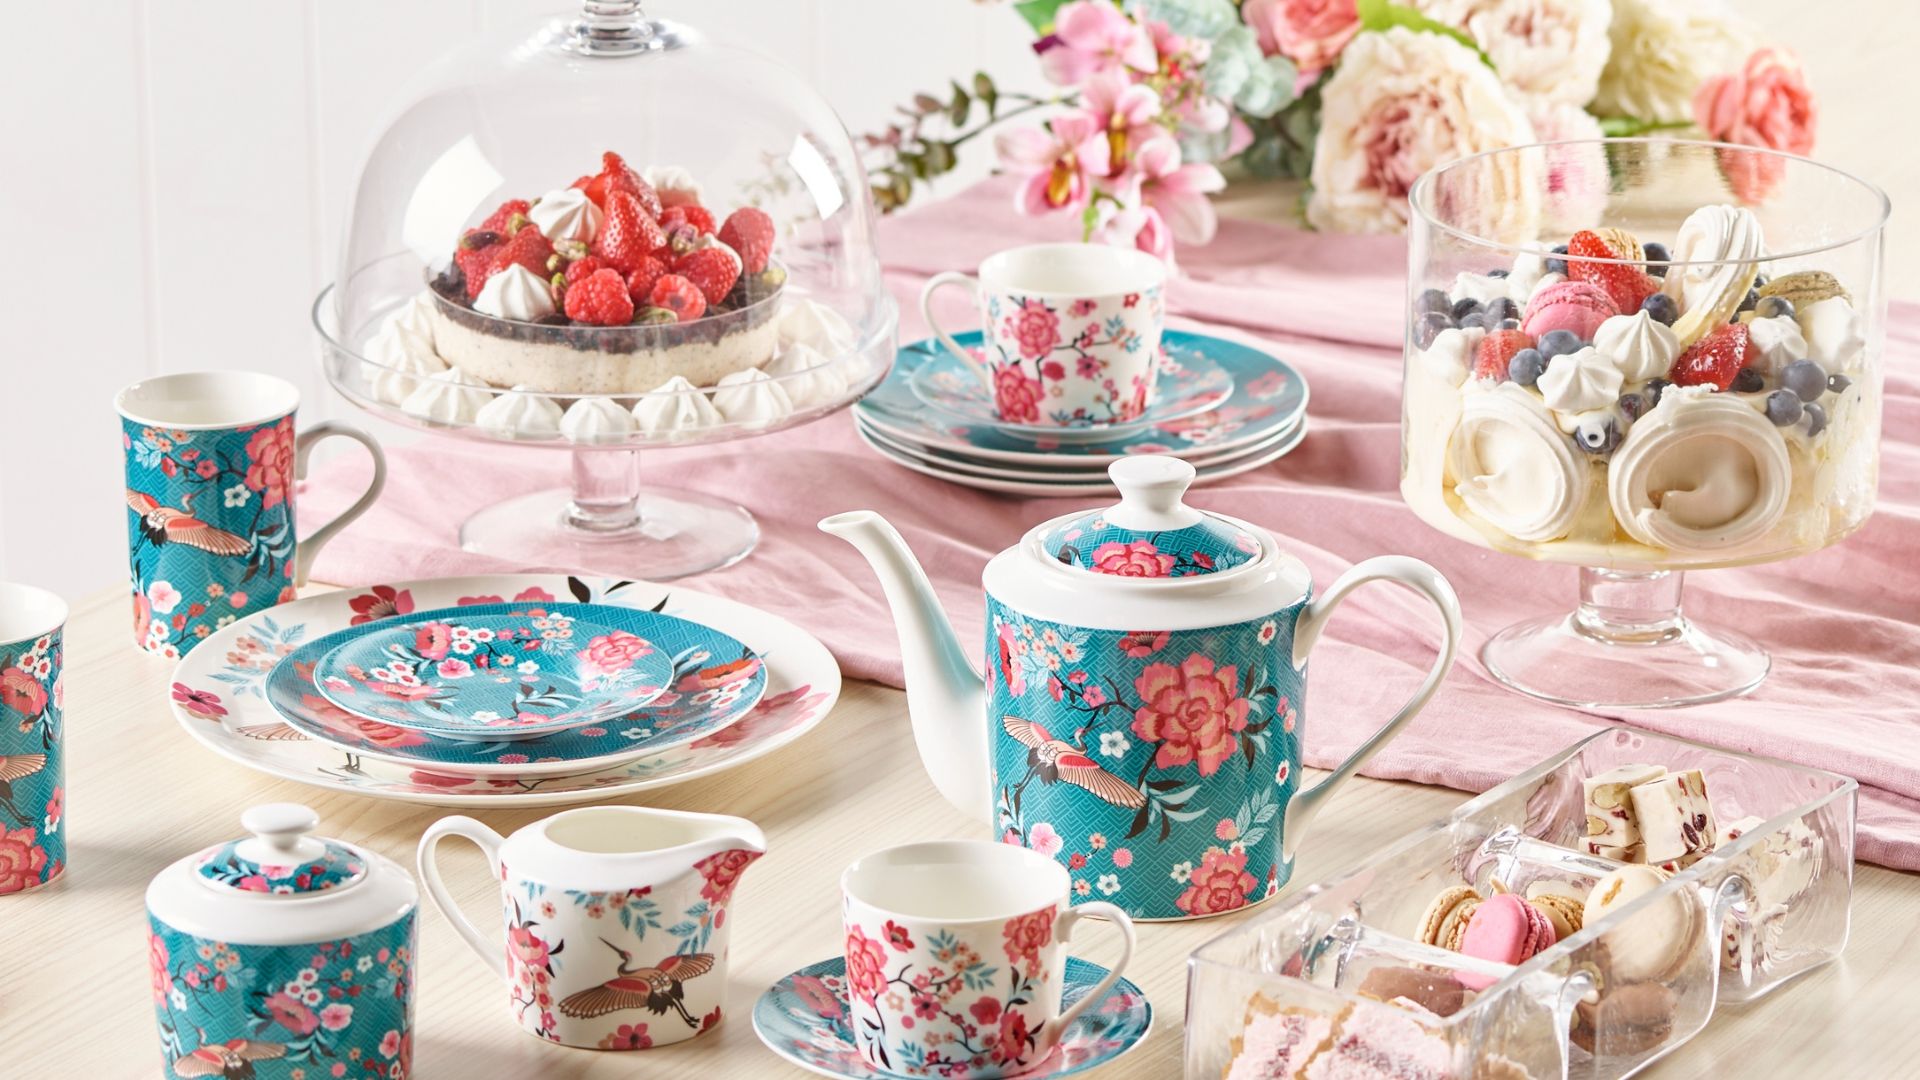 Enjoy A High Tea Party In Your Own Home